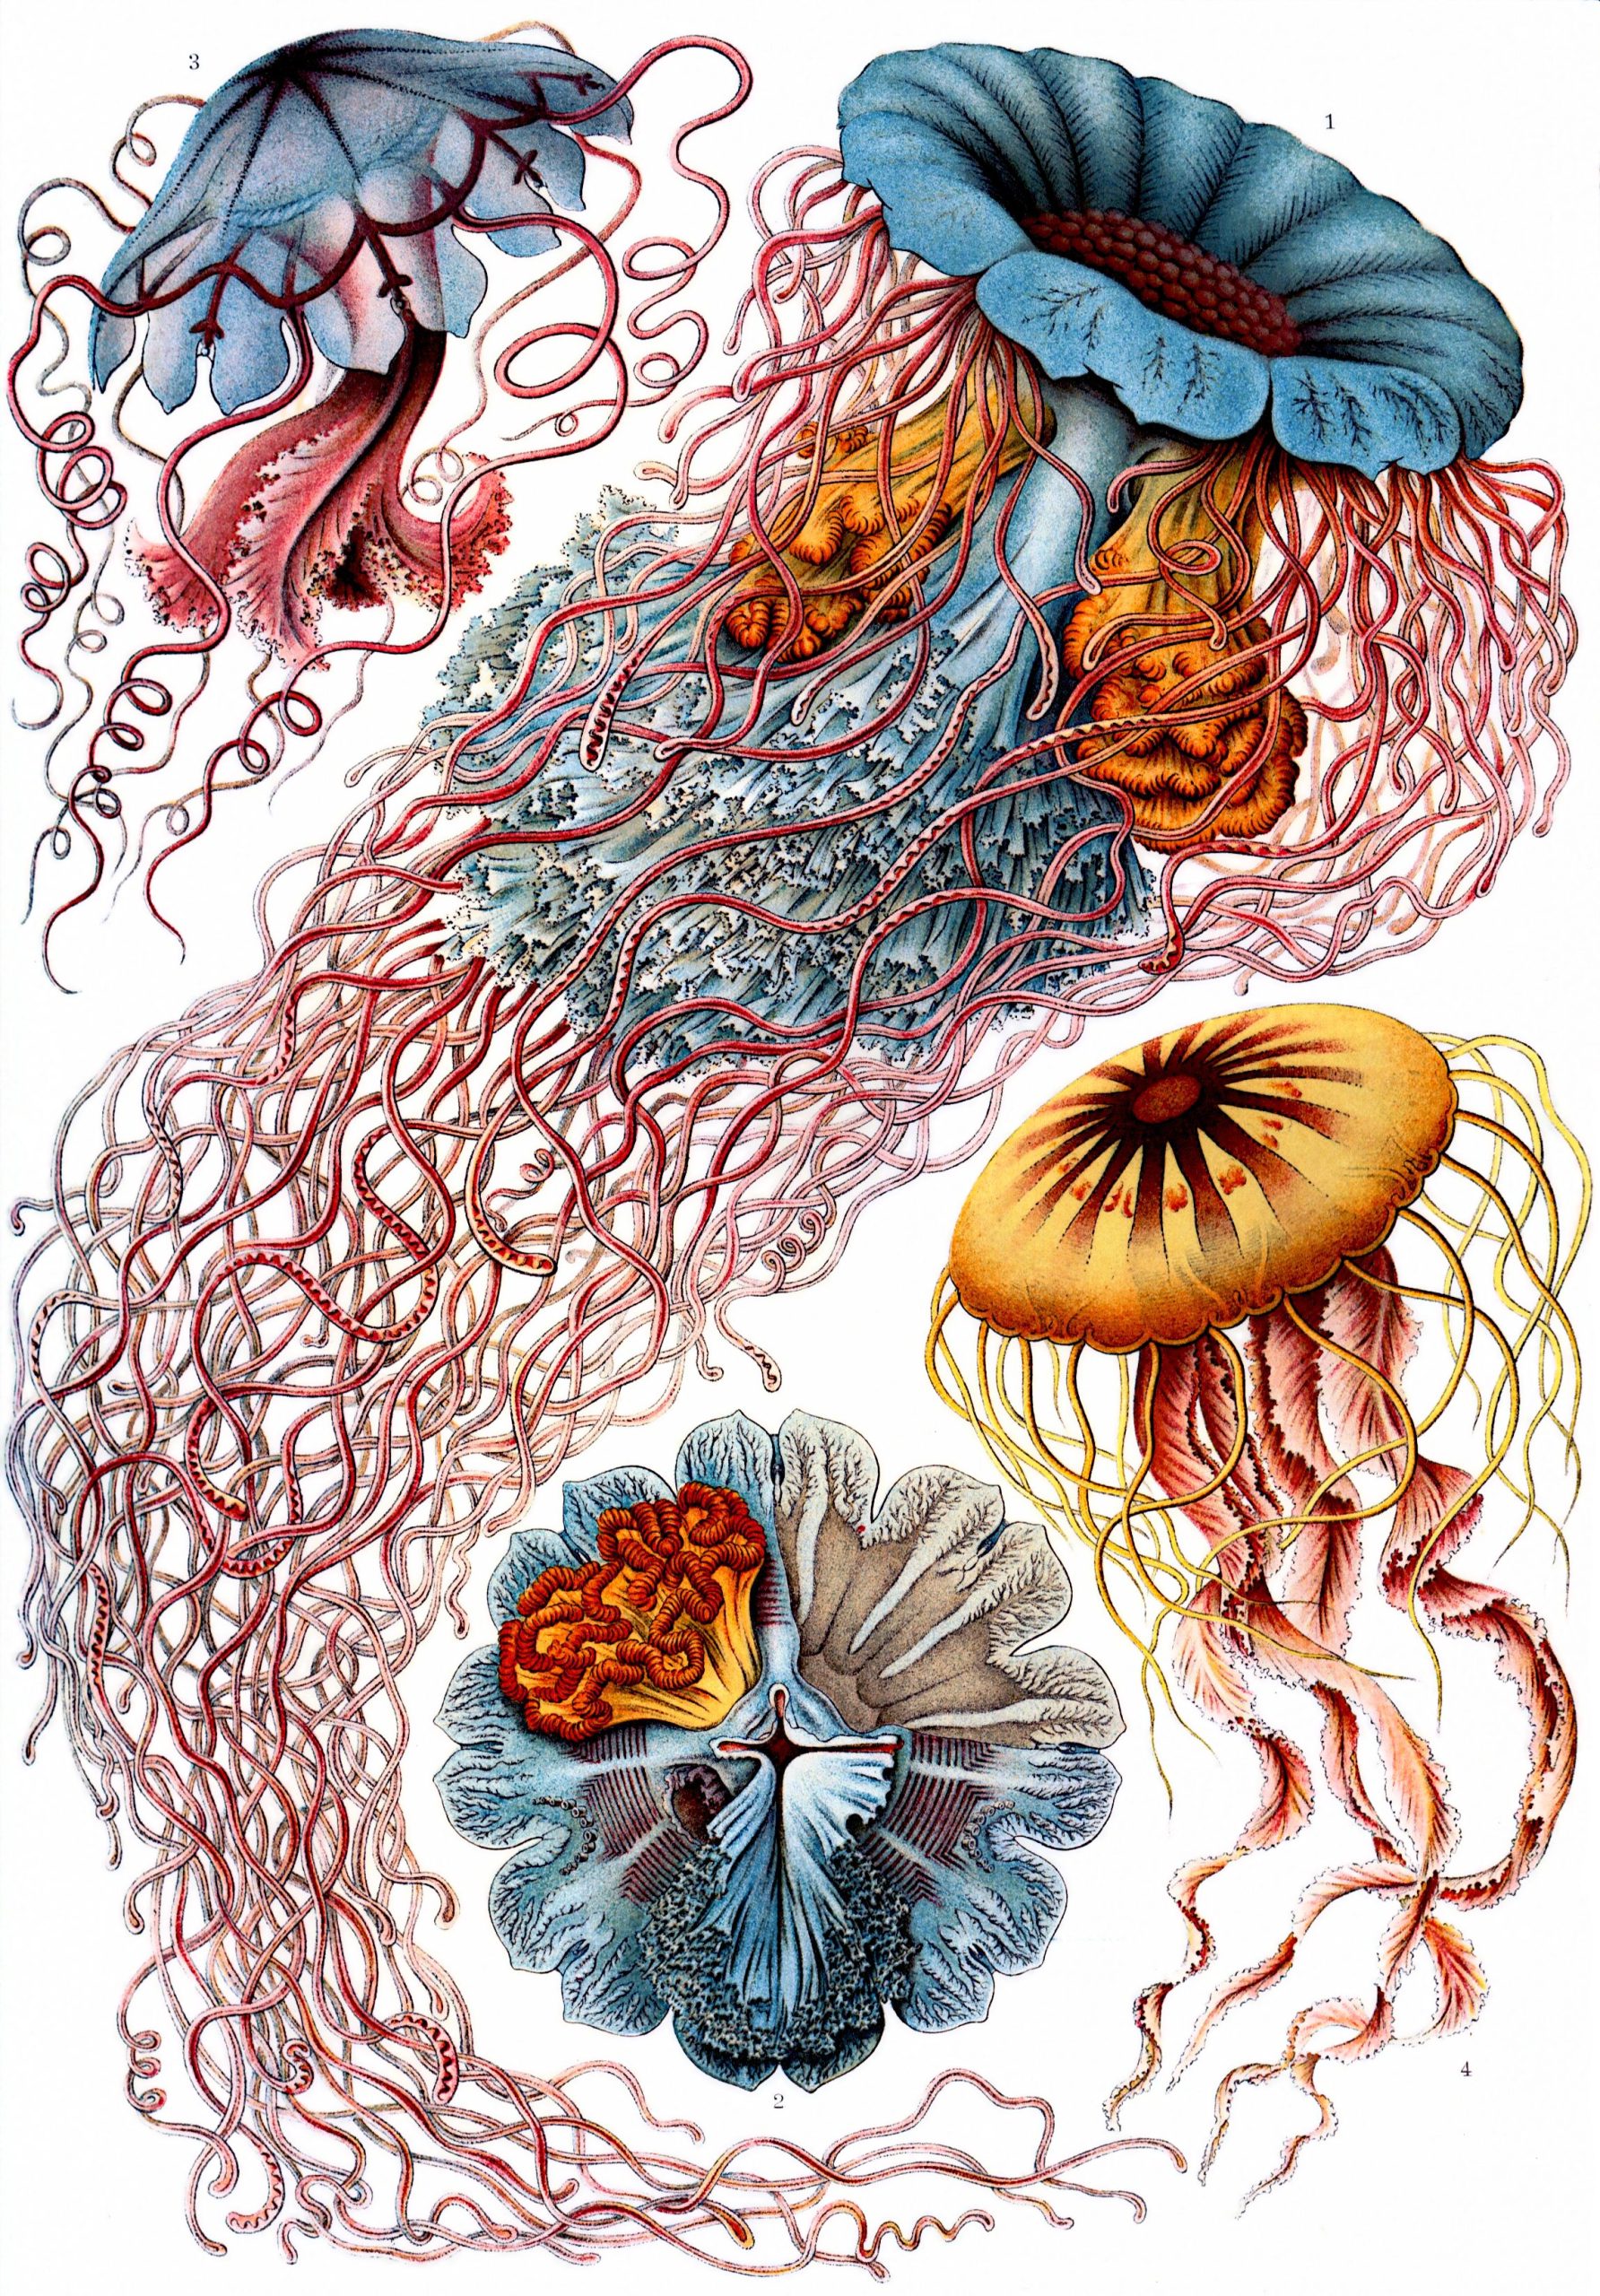 A scientific illustration of various jellyfish